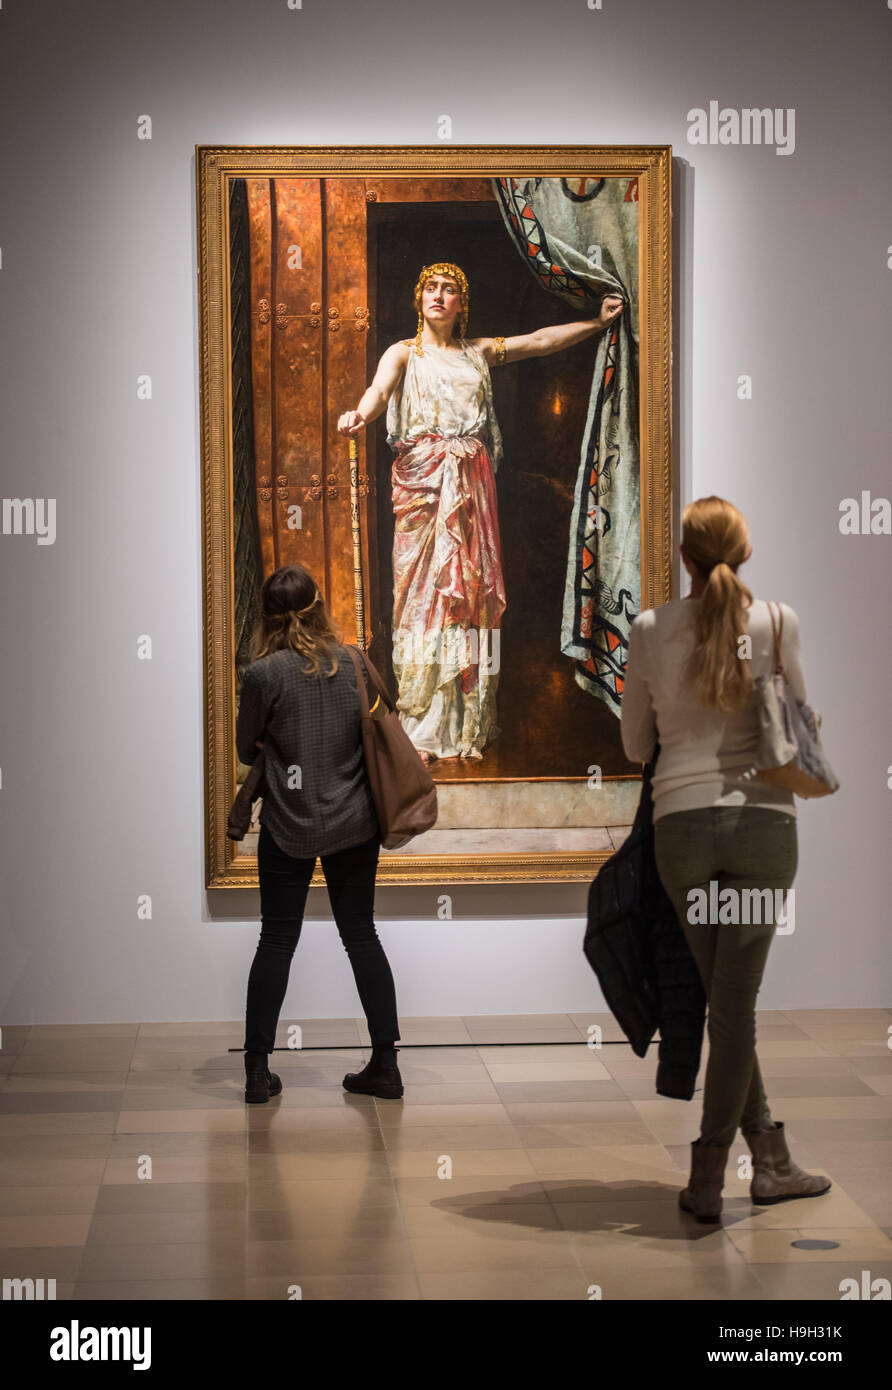 Two visitors look at the painting Clytemnestra (1852, John Collier) at the Staedel Museum in Frankfurt am Main, Germany, 23 November 2016. The art exhibition Geschlechterkampf. Franz von Stuck bis Frida KahLo (lit. Battle of the Sexes. Franz von Stuck to Frida Kahlo) runs at the Staedel Museum from 24.11.2016 - 19.3.2017 and deals with masculine and feminine identities from the mid-19th century until the end of WWII. Photo: Andreas Arnold/dpa Stock Photo